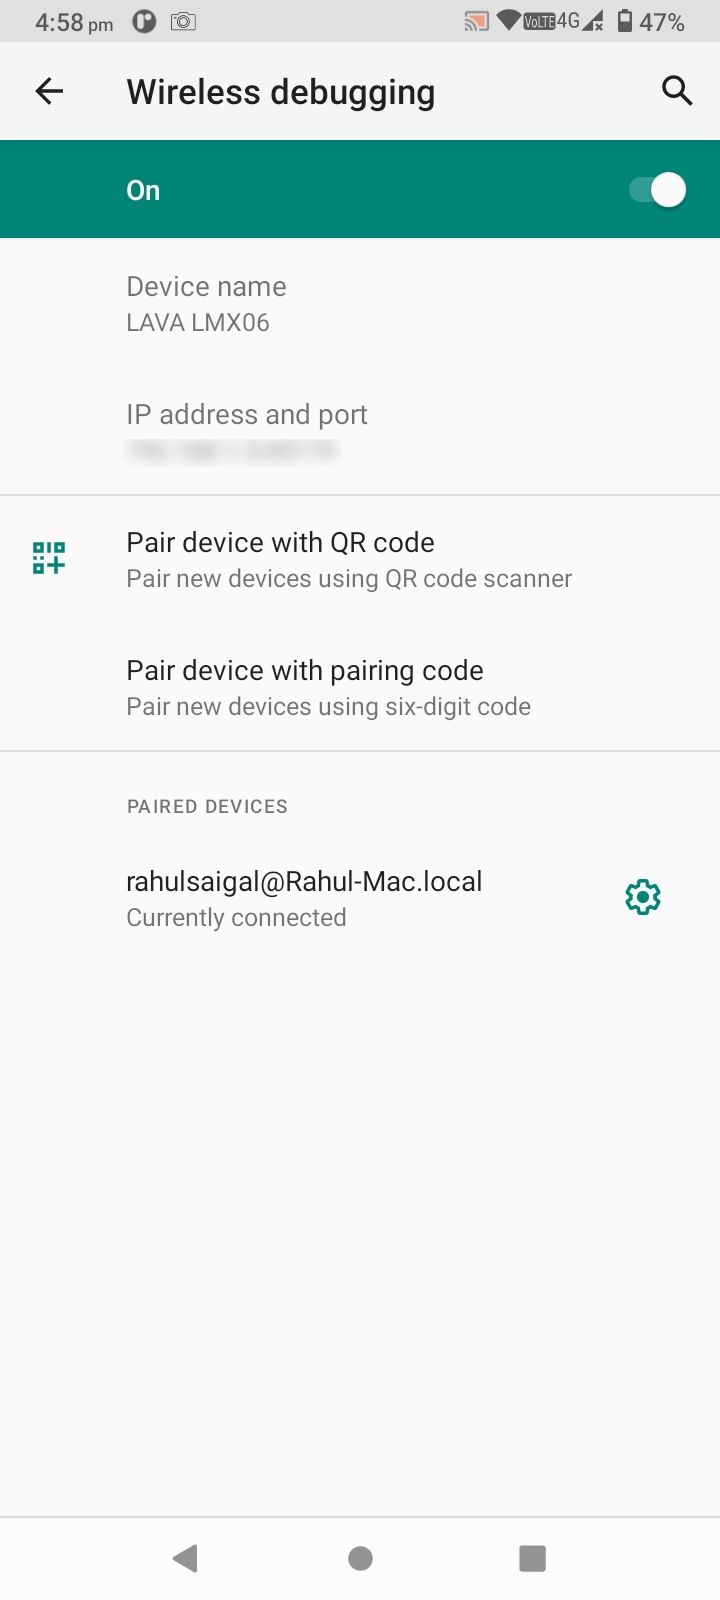 pair device with the pairing code